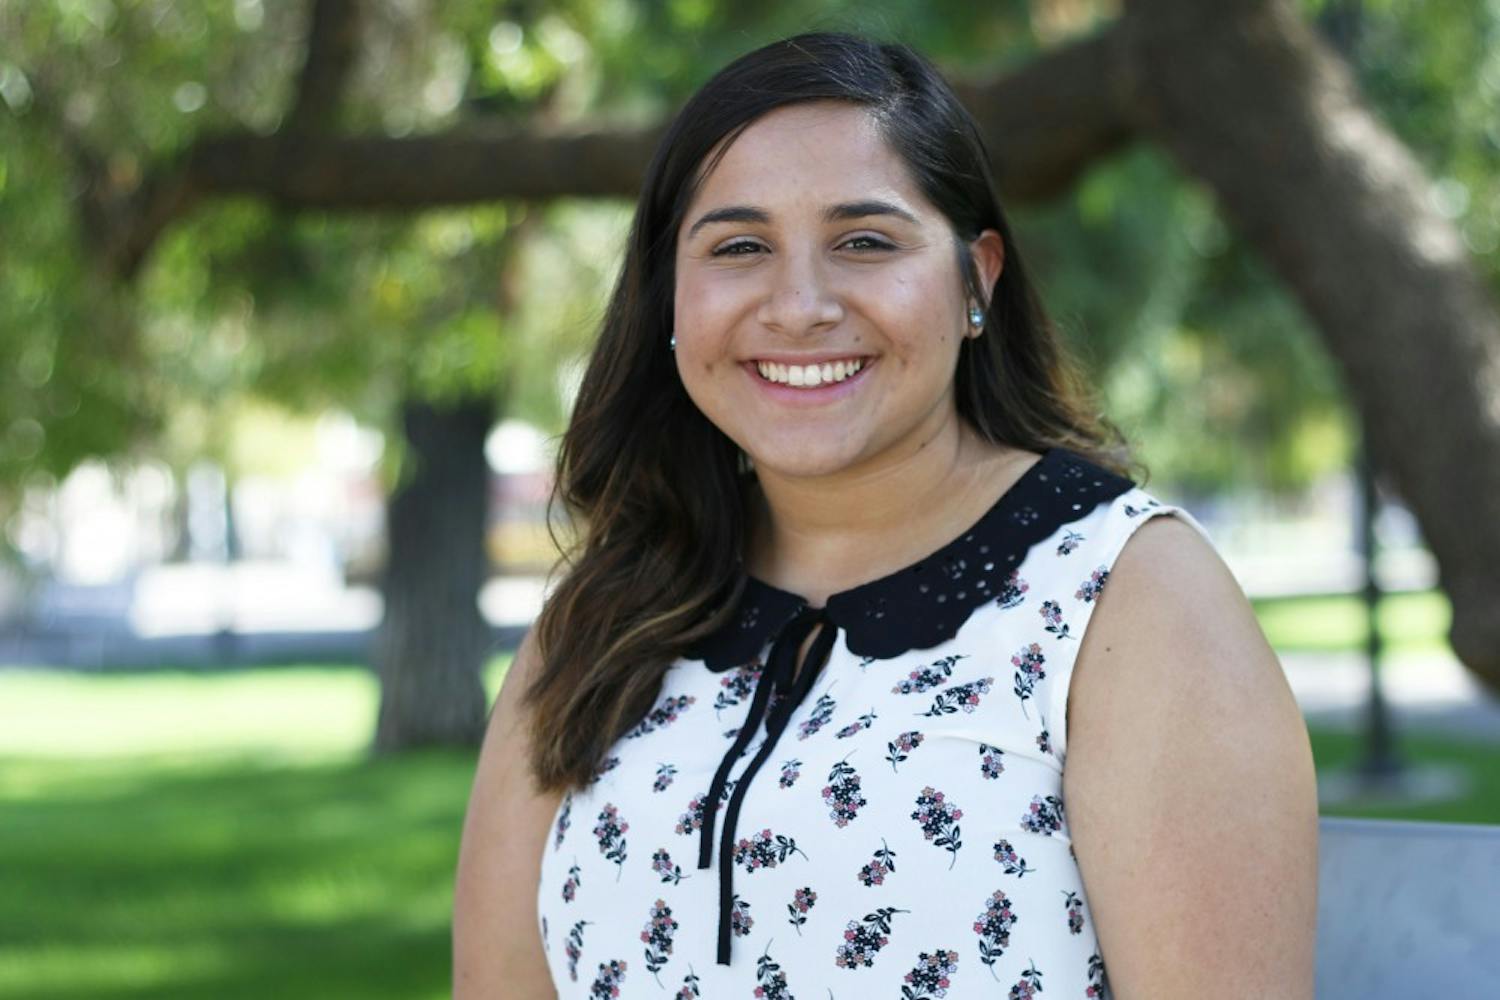 Leonela Urrutia, sophomore political science major, poses for a photo at the Tempe campus on Friday Oct. 21, 2016.